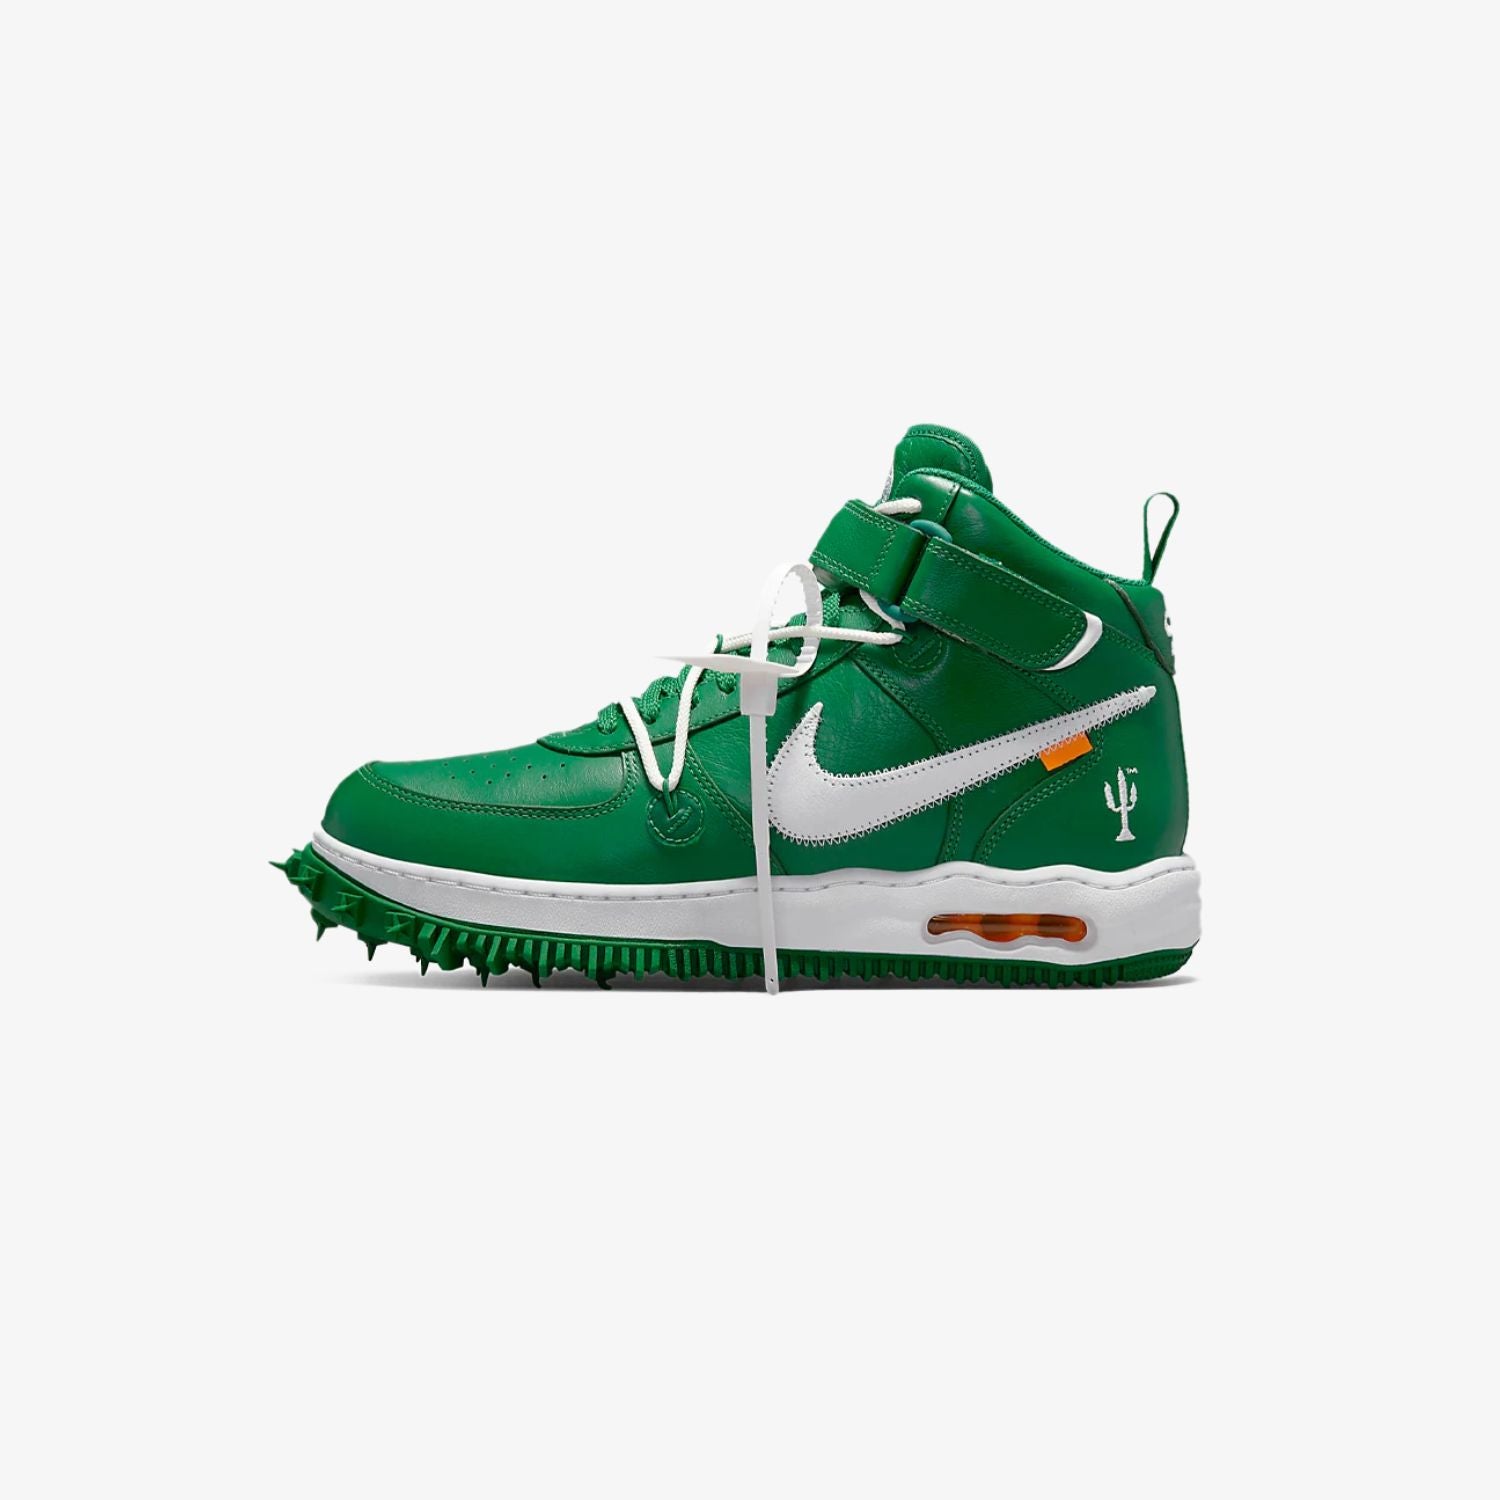 off-white-nike-air-force-1-pine-green-DR0500-300-unfazed-1_1